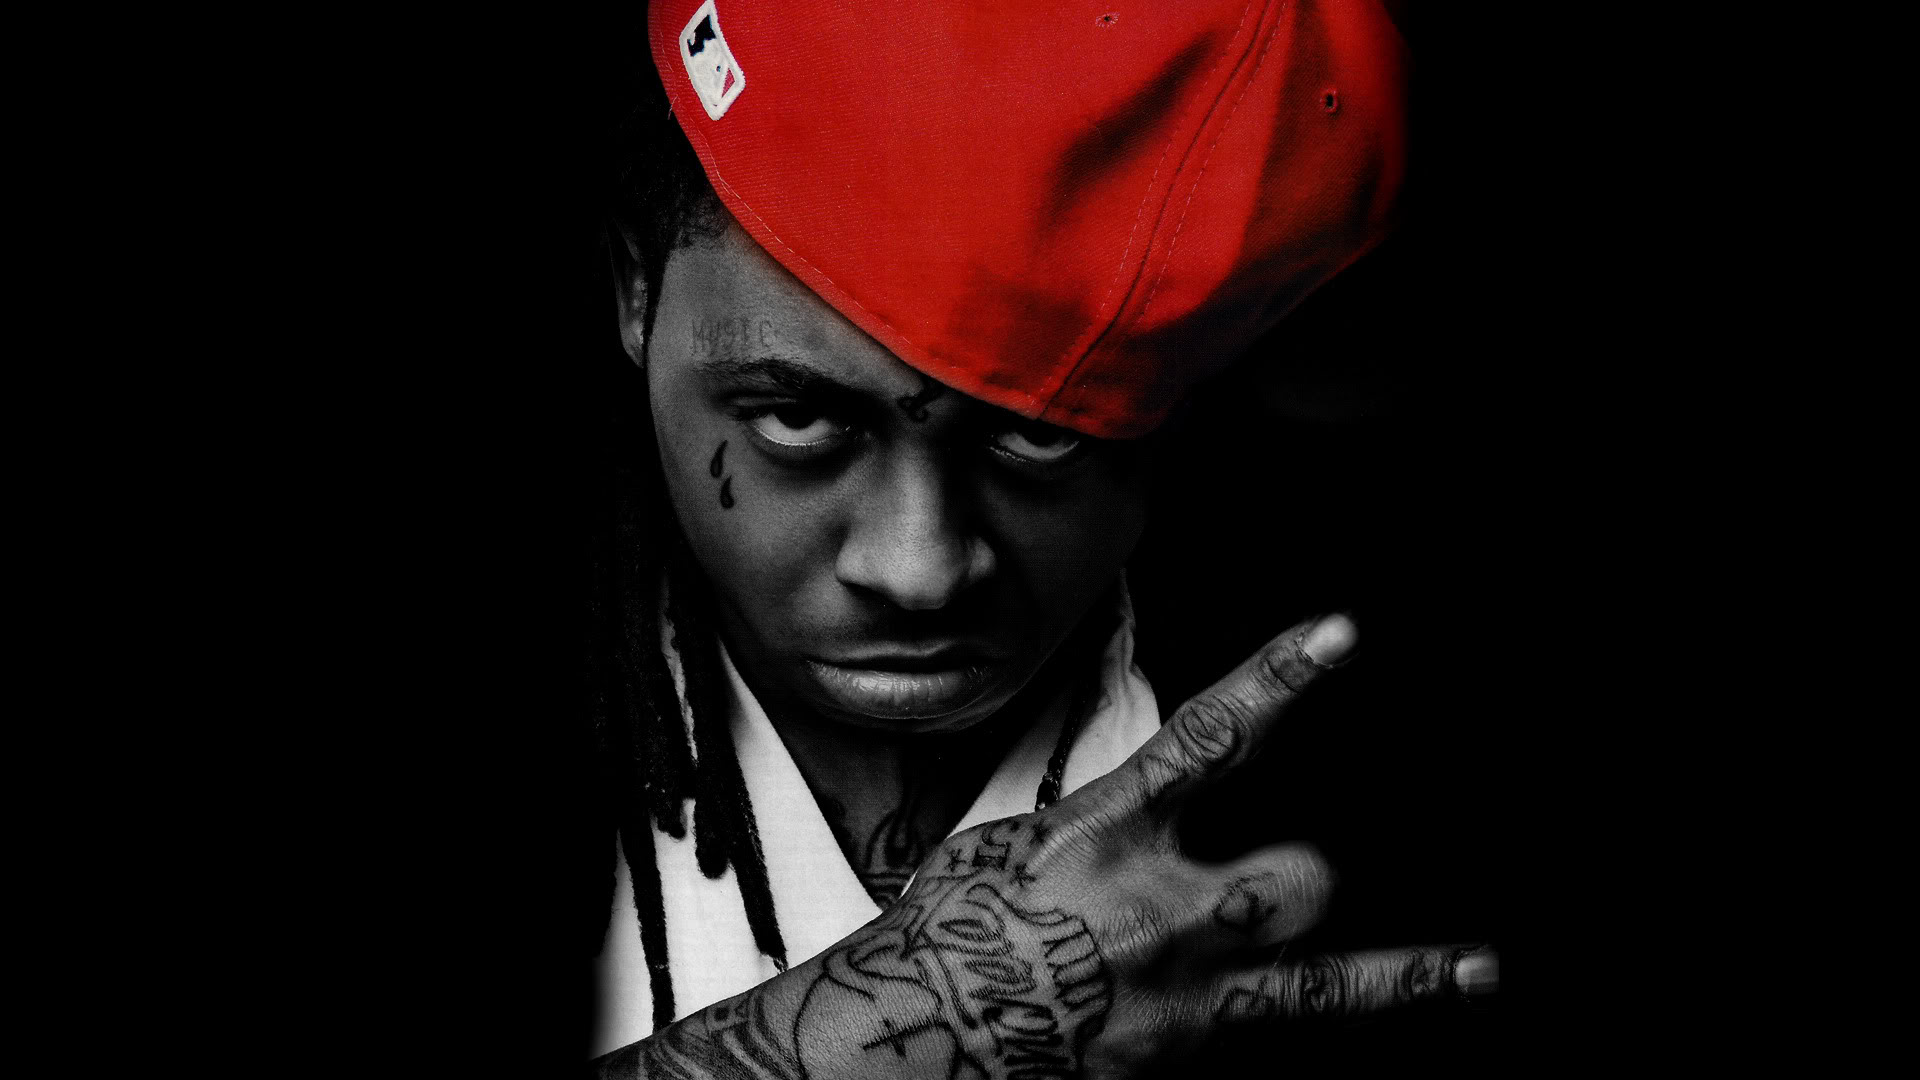 Shots were fired this weekend at the tour bus of hip hop star Lil Wayne after he performed in an ATL nightclub.